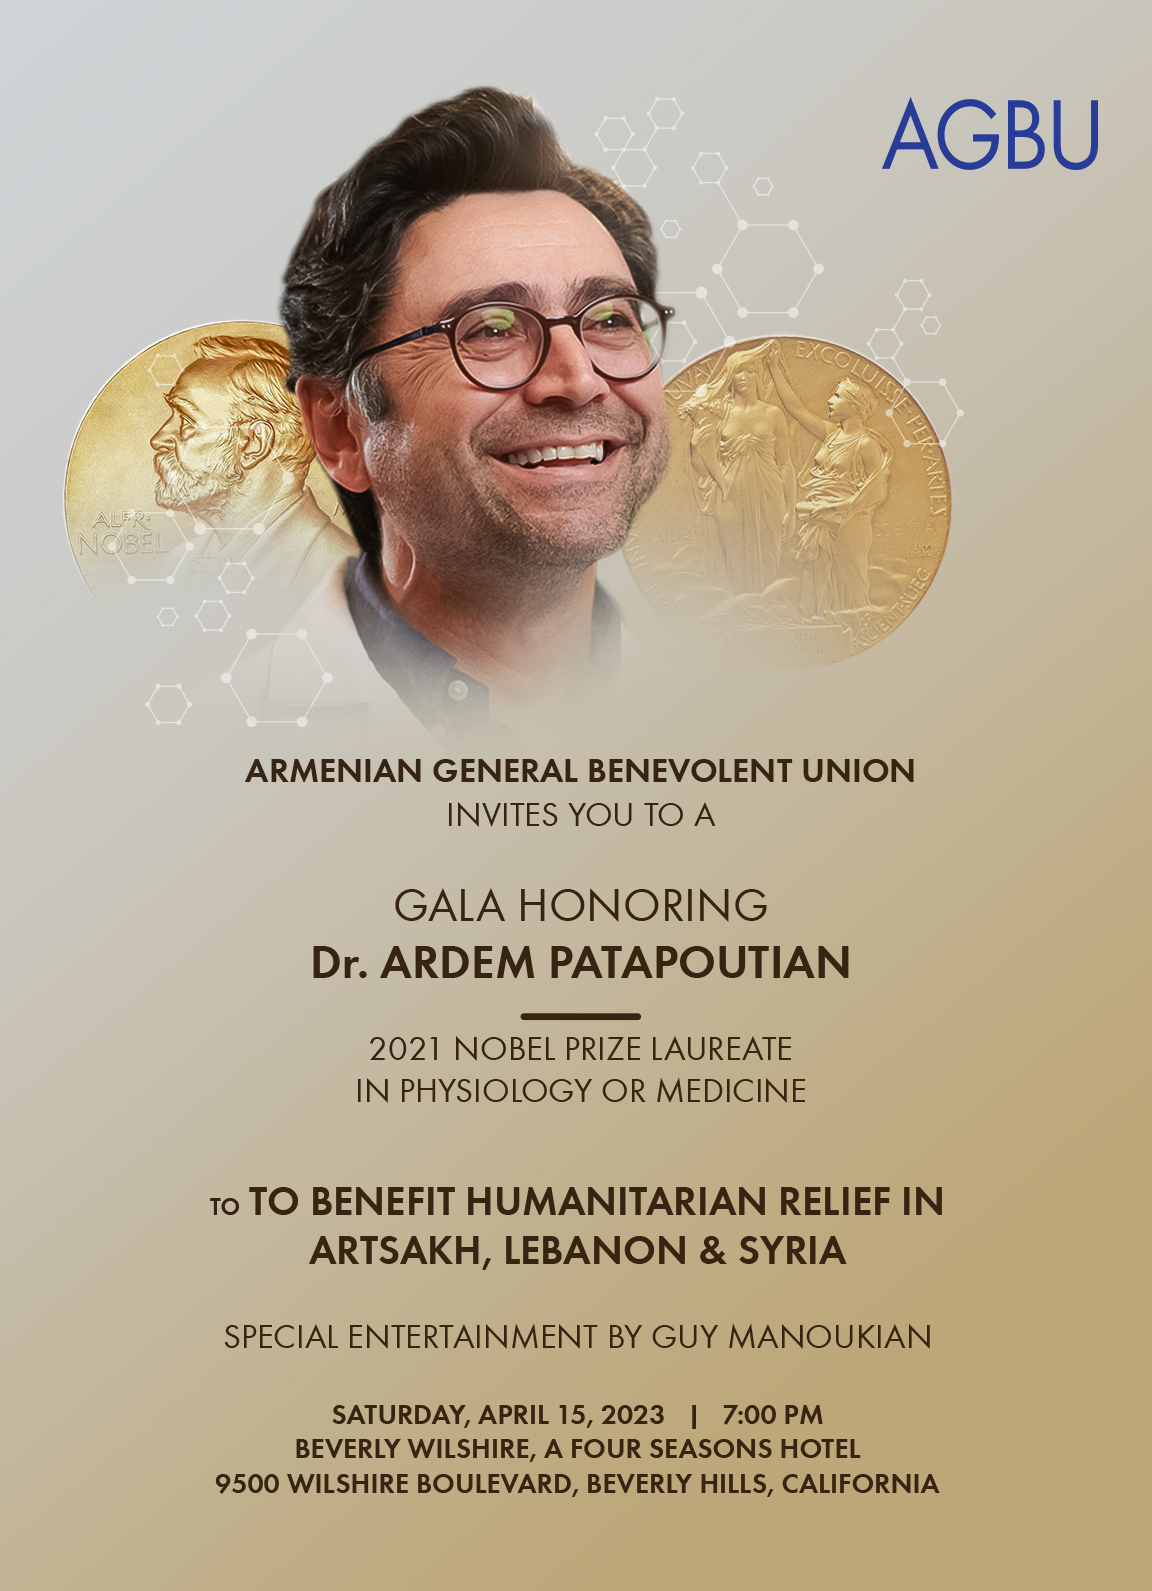 Gala Honoring Dr. Ardem Patapoutian